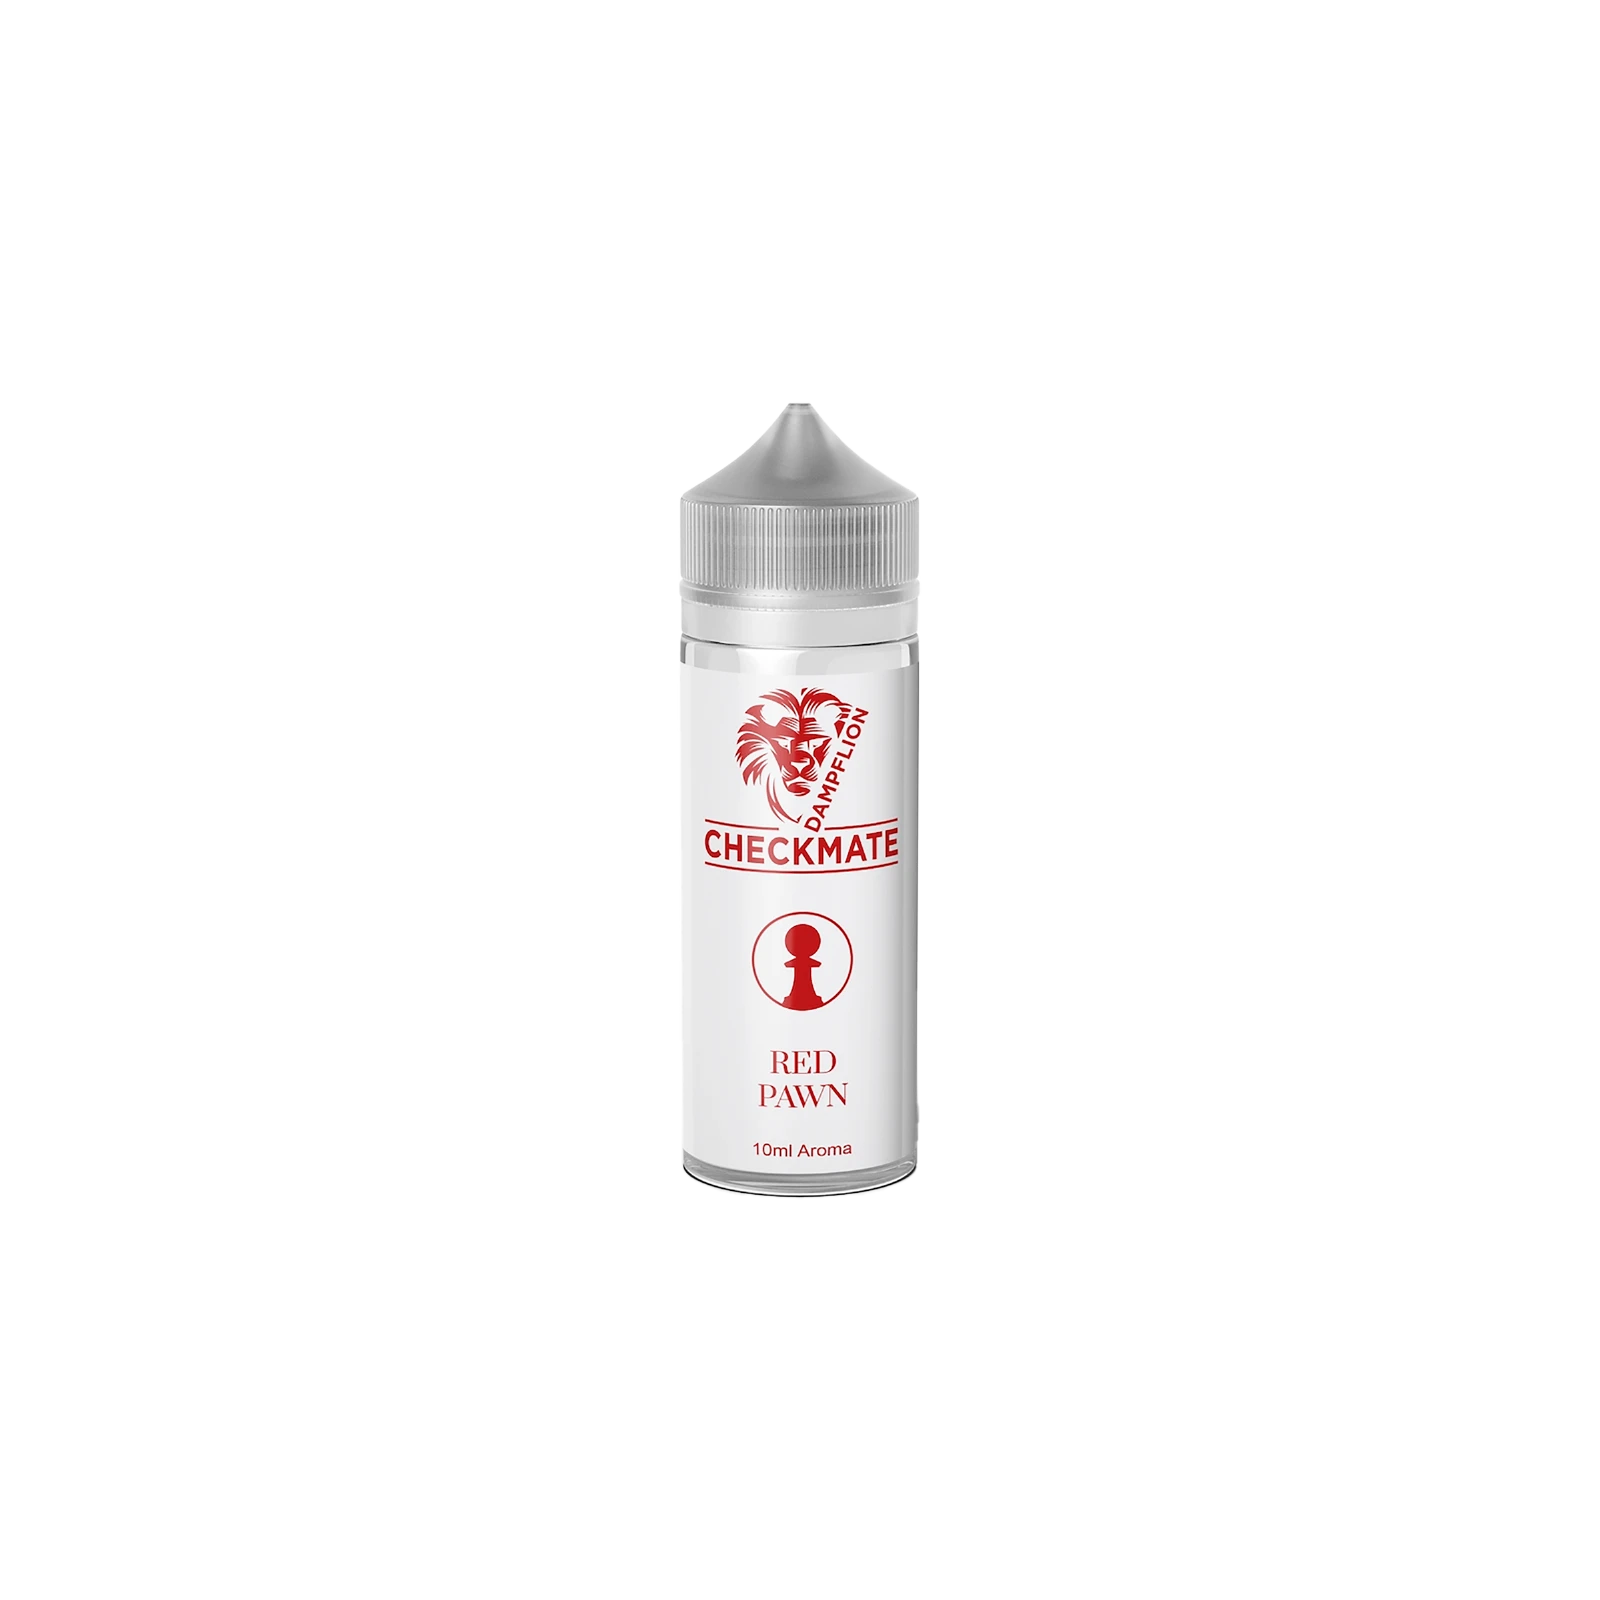 Dampflion Checkmate Aroma Longfill Red Pawn 10ml